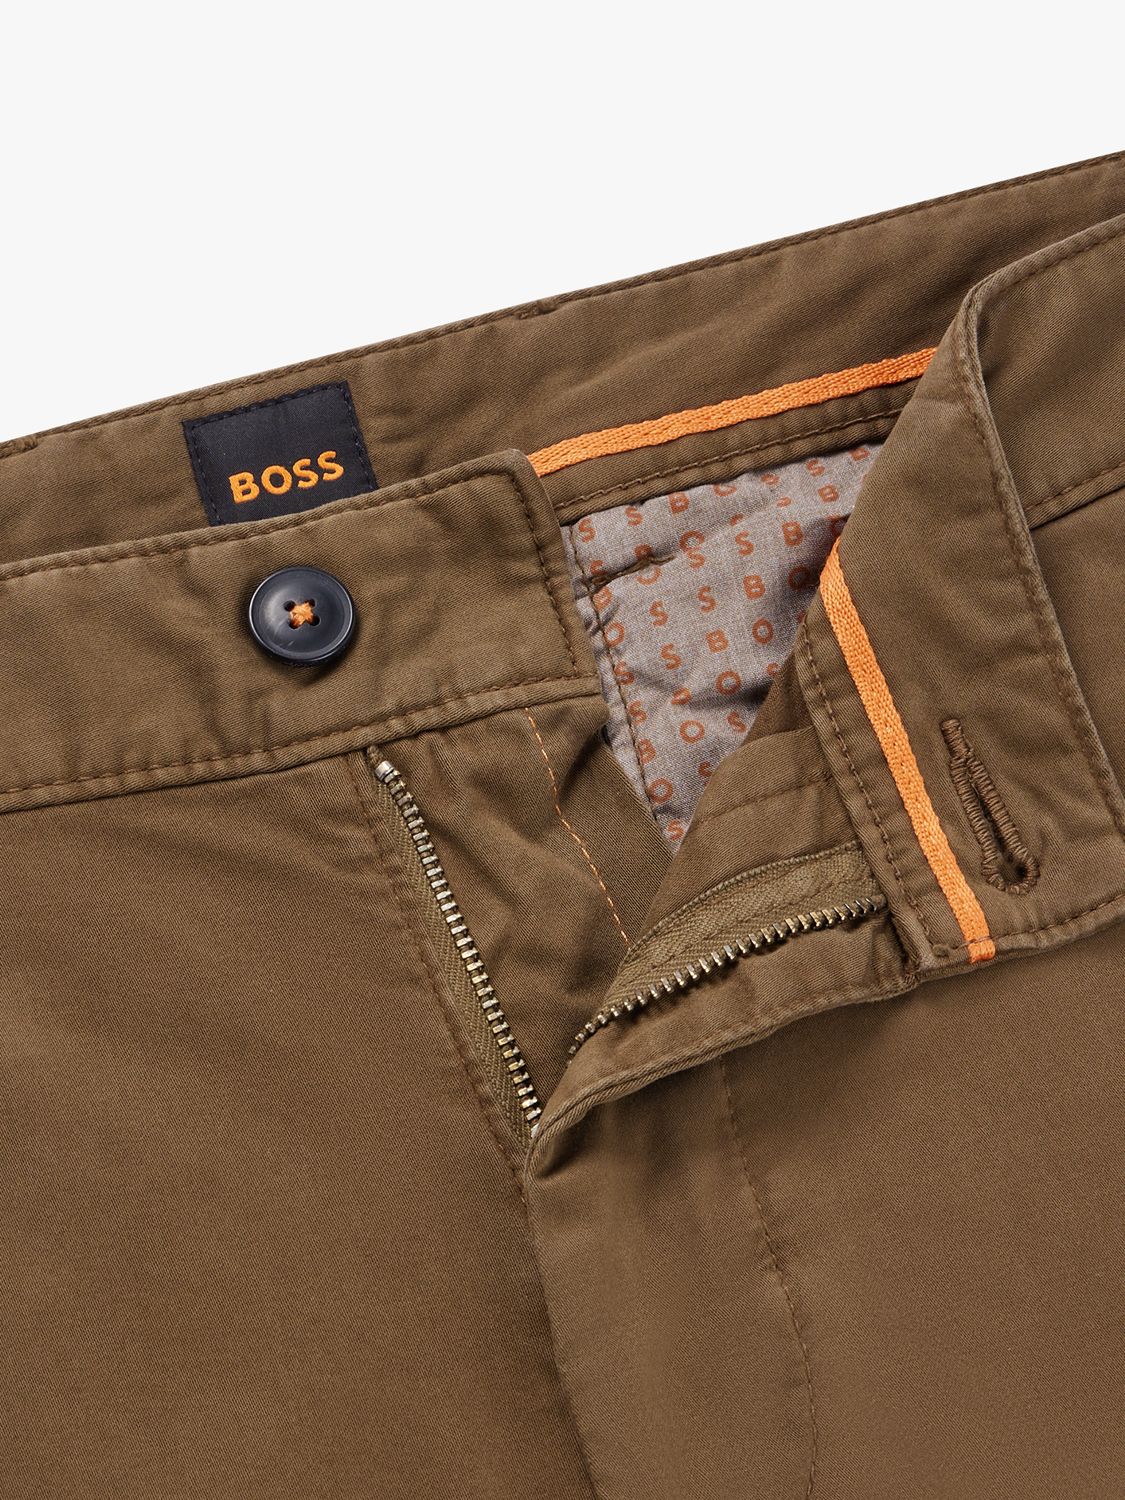 BOSS Slim Fit Chino Trousers, Green, 40R